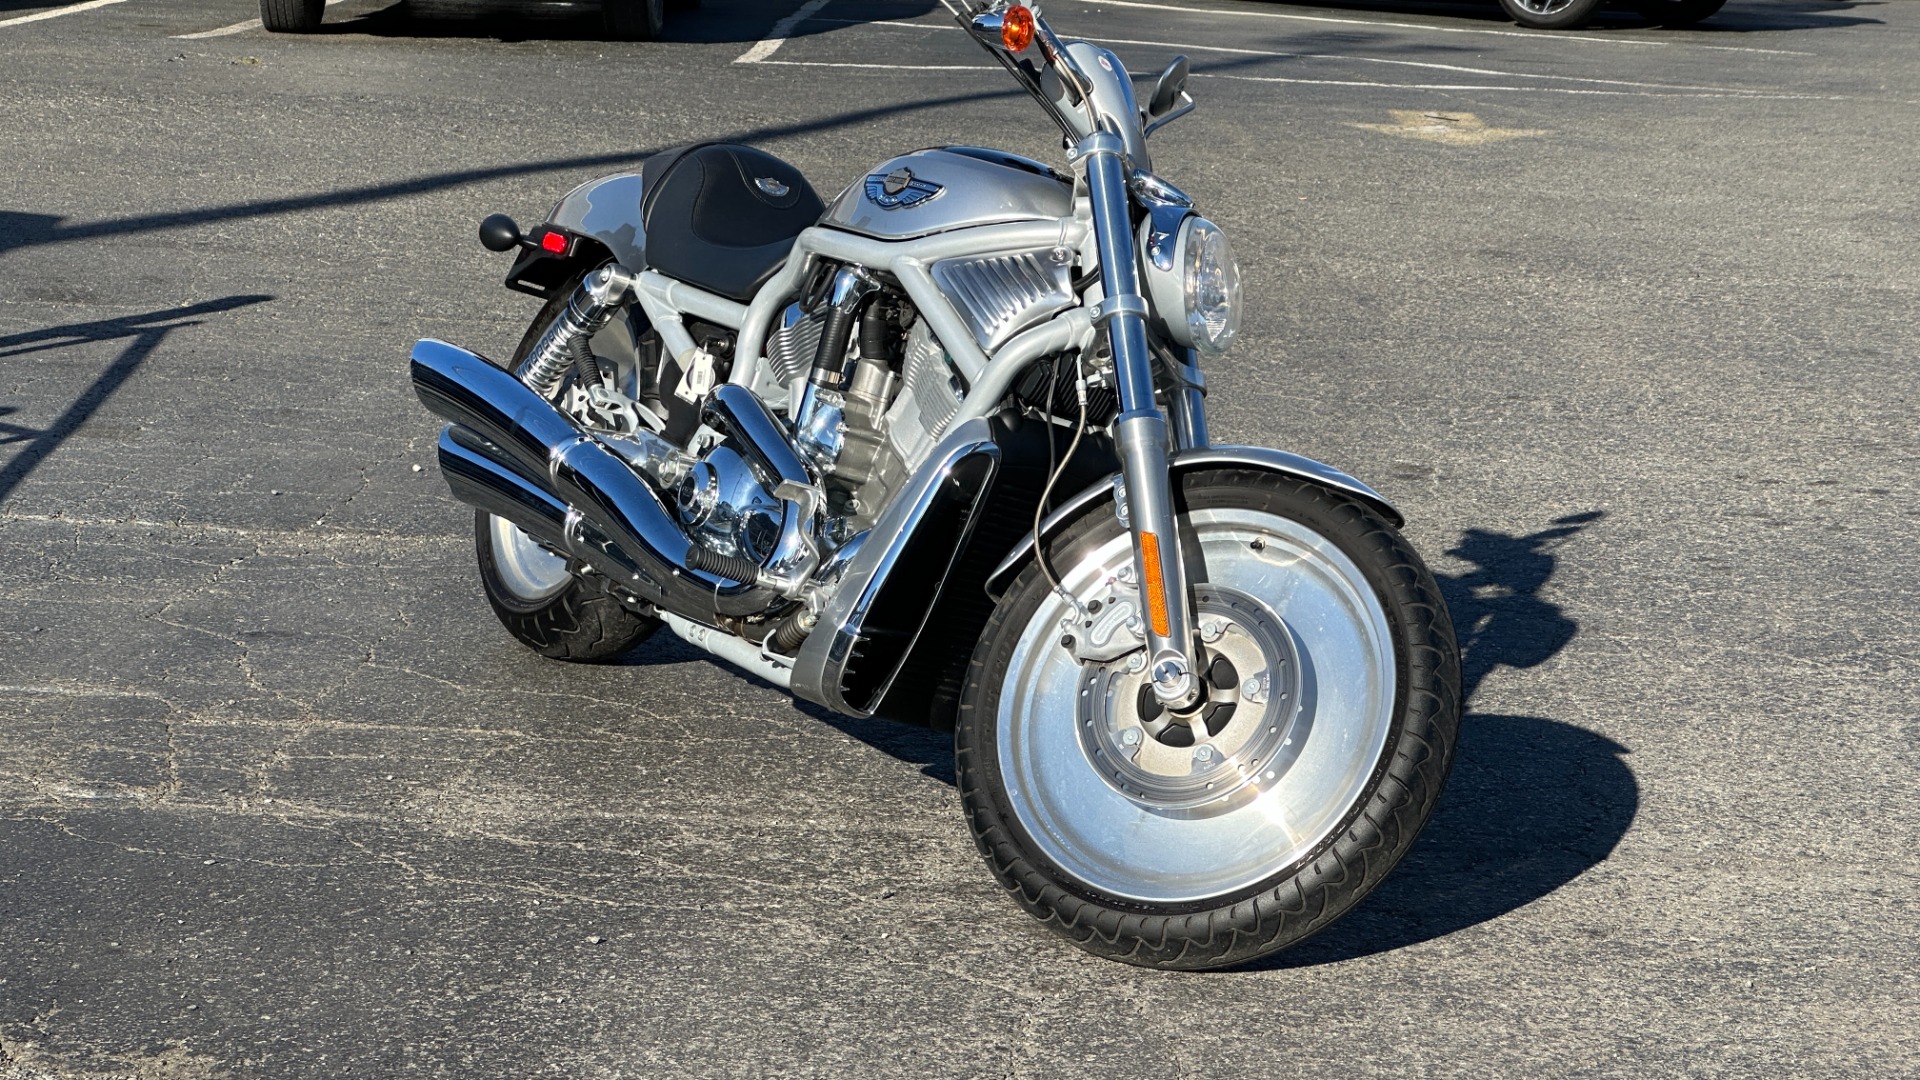 Used 2003 Harley Davidson V Rod ANNIVERSARY EDITION / 1130CC ENGINE / BREMBO BRAKES / VORTEX AIR SCOOPS for sale $7,995 at Formula Imports in Charlotte NC 28227 59